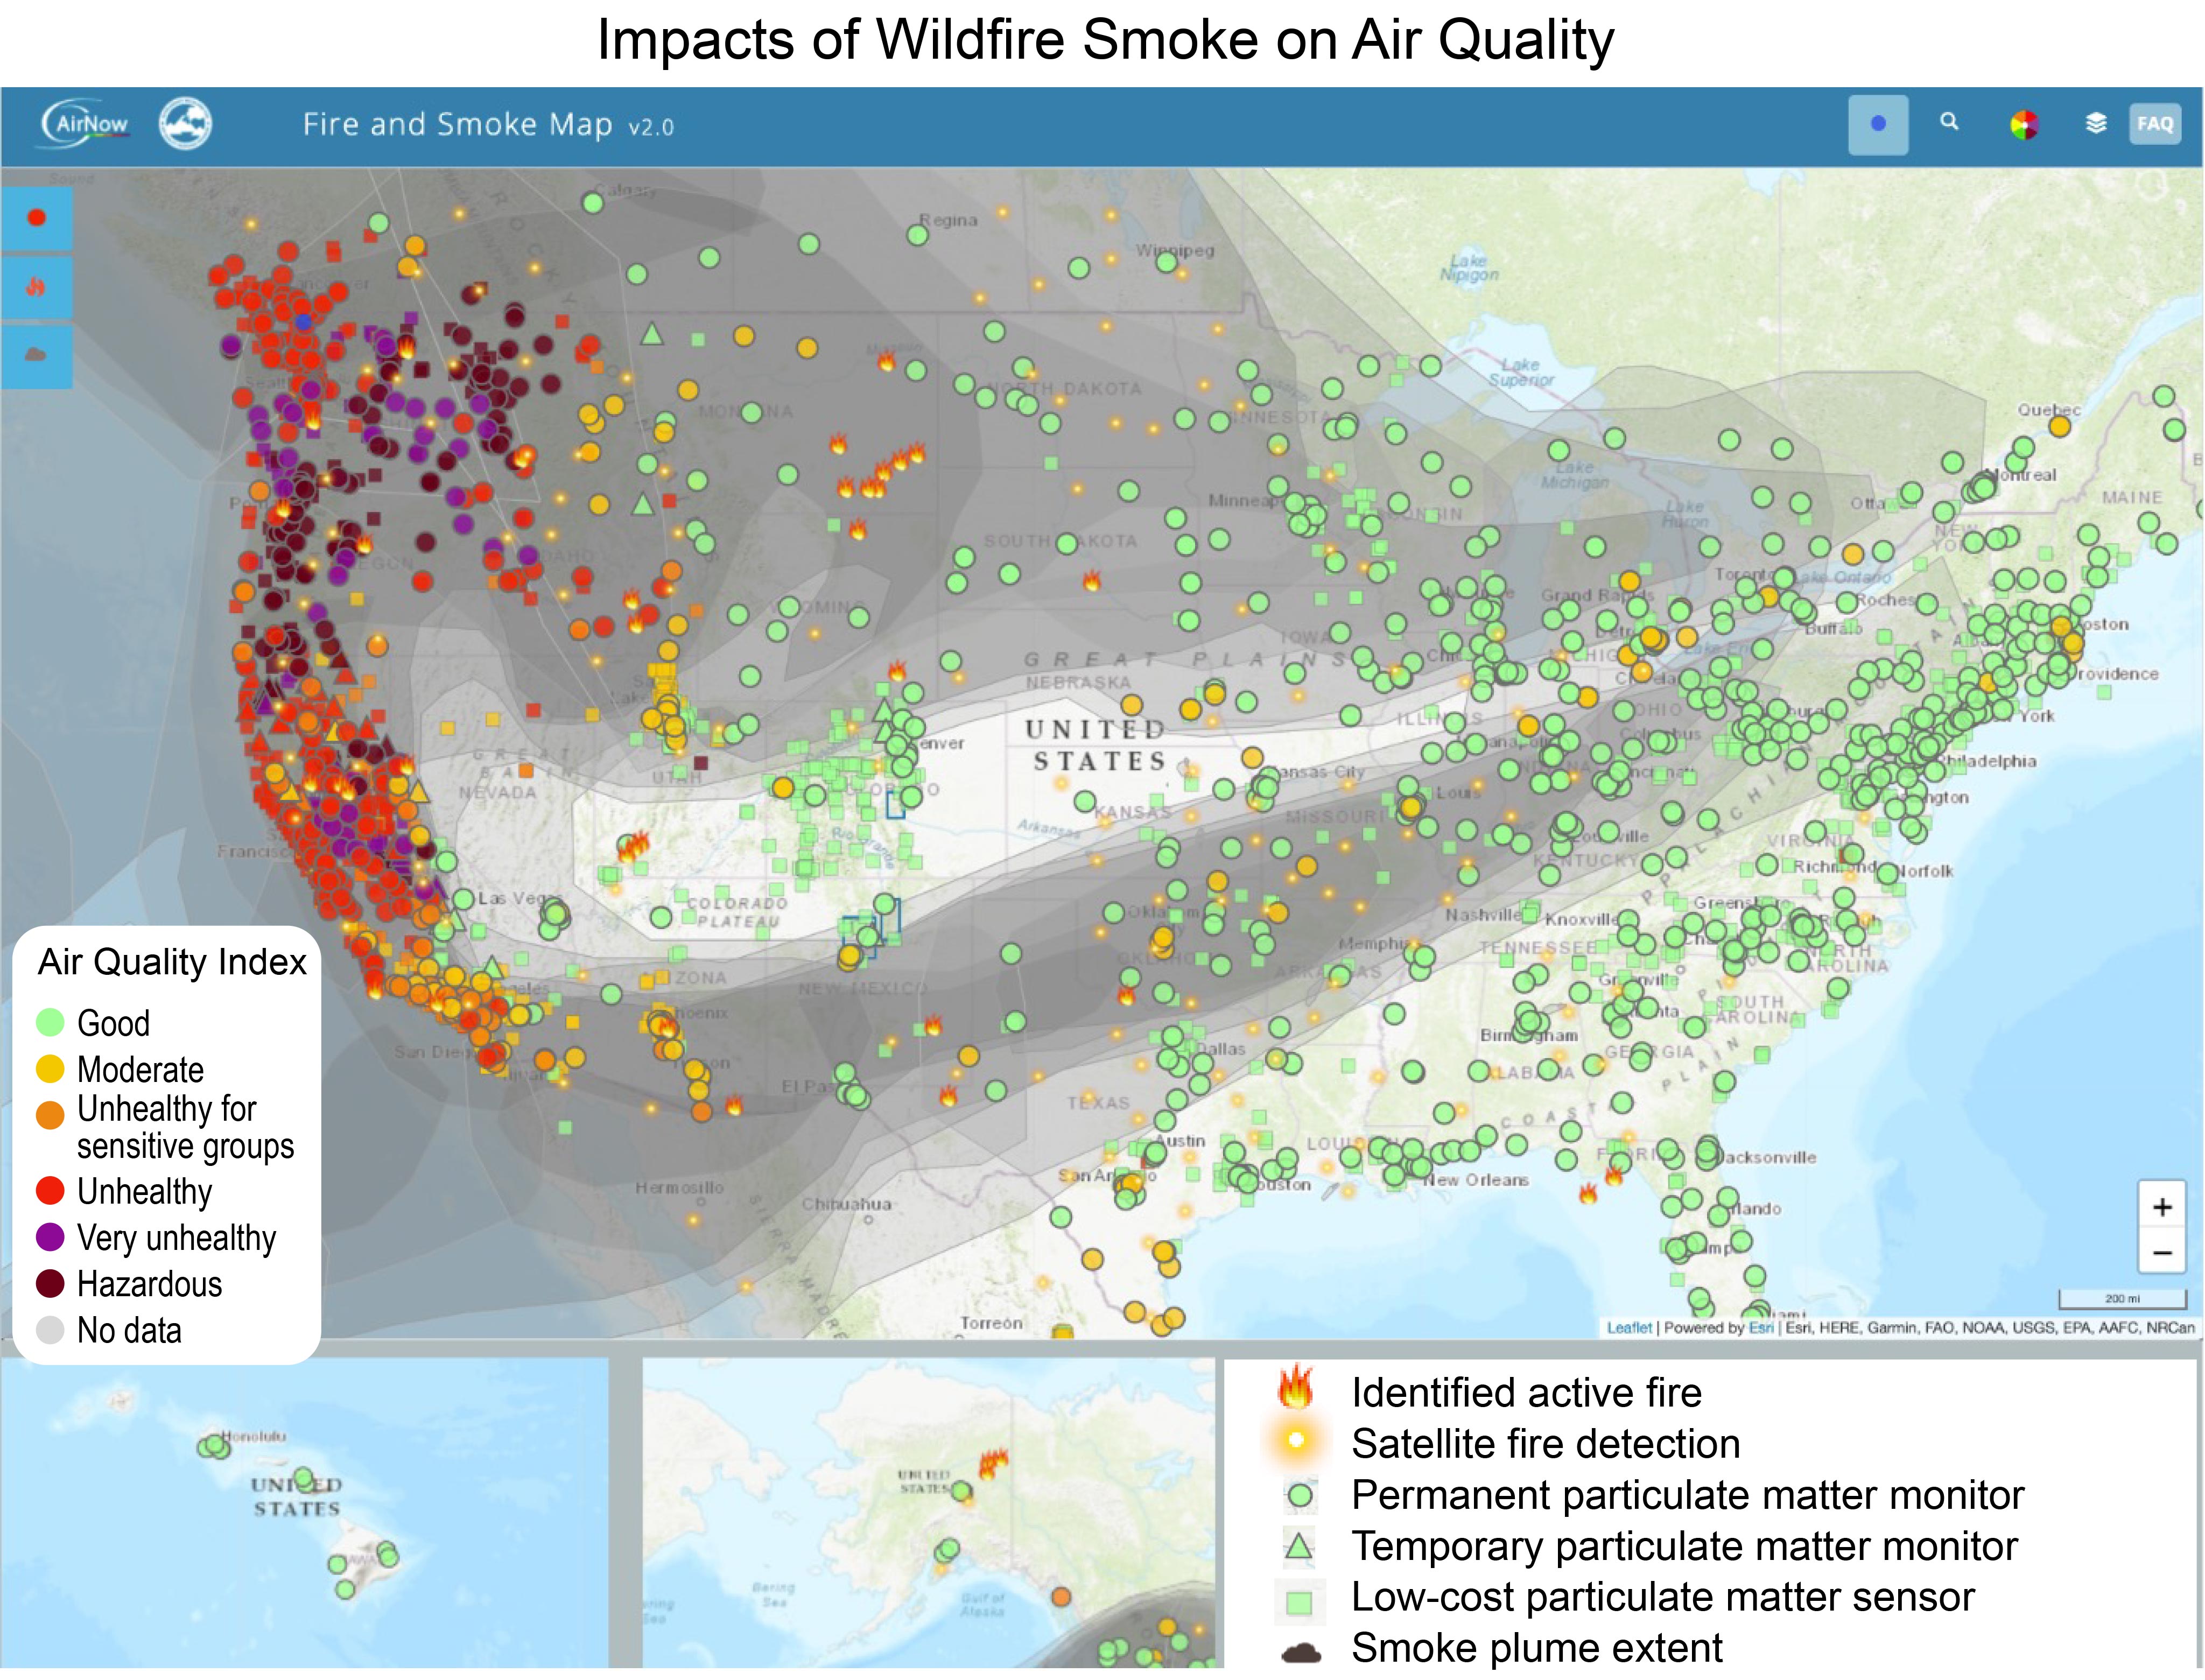 Impacts of Wildfire Smoke on Air Quality